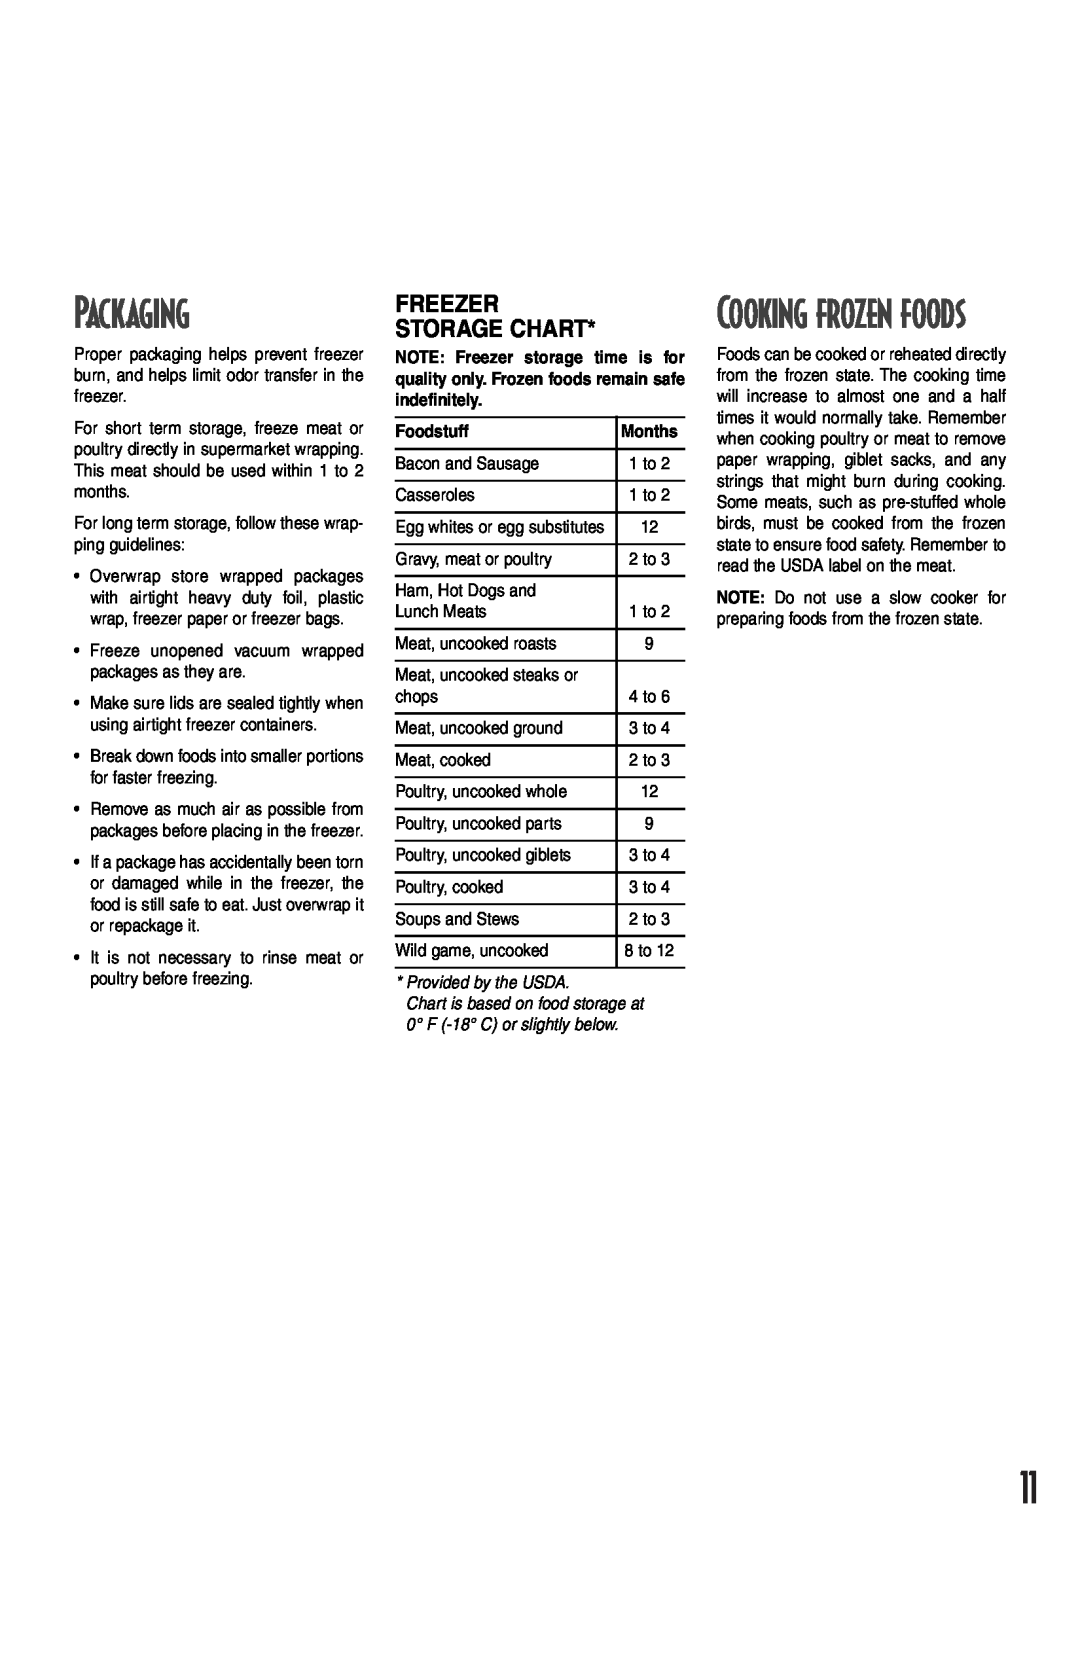 Amana Deepfreeze Chest Freezer Packaging, Cooking frozen foods, Freezer Storage Chart, Foodstuff, Provided by the USDA 